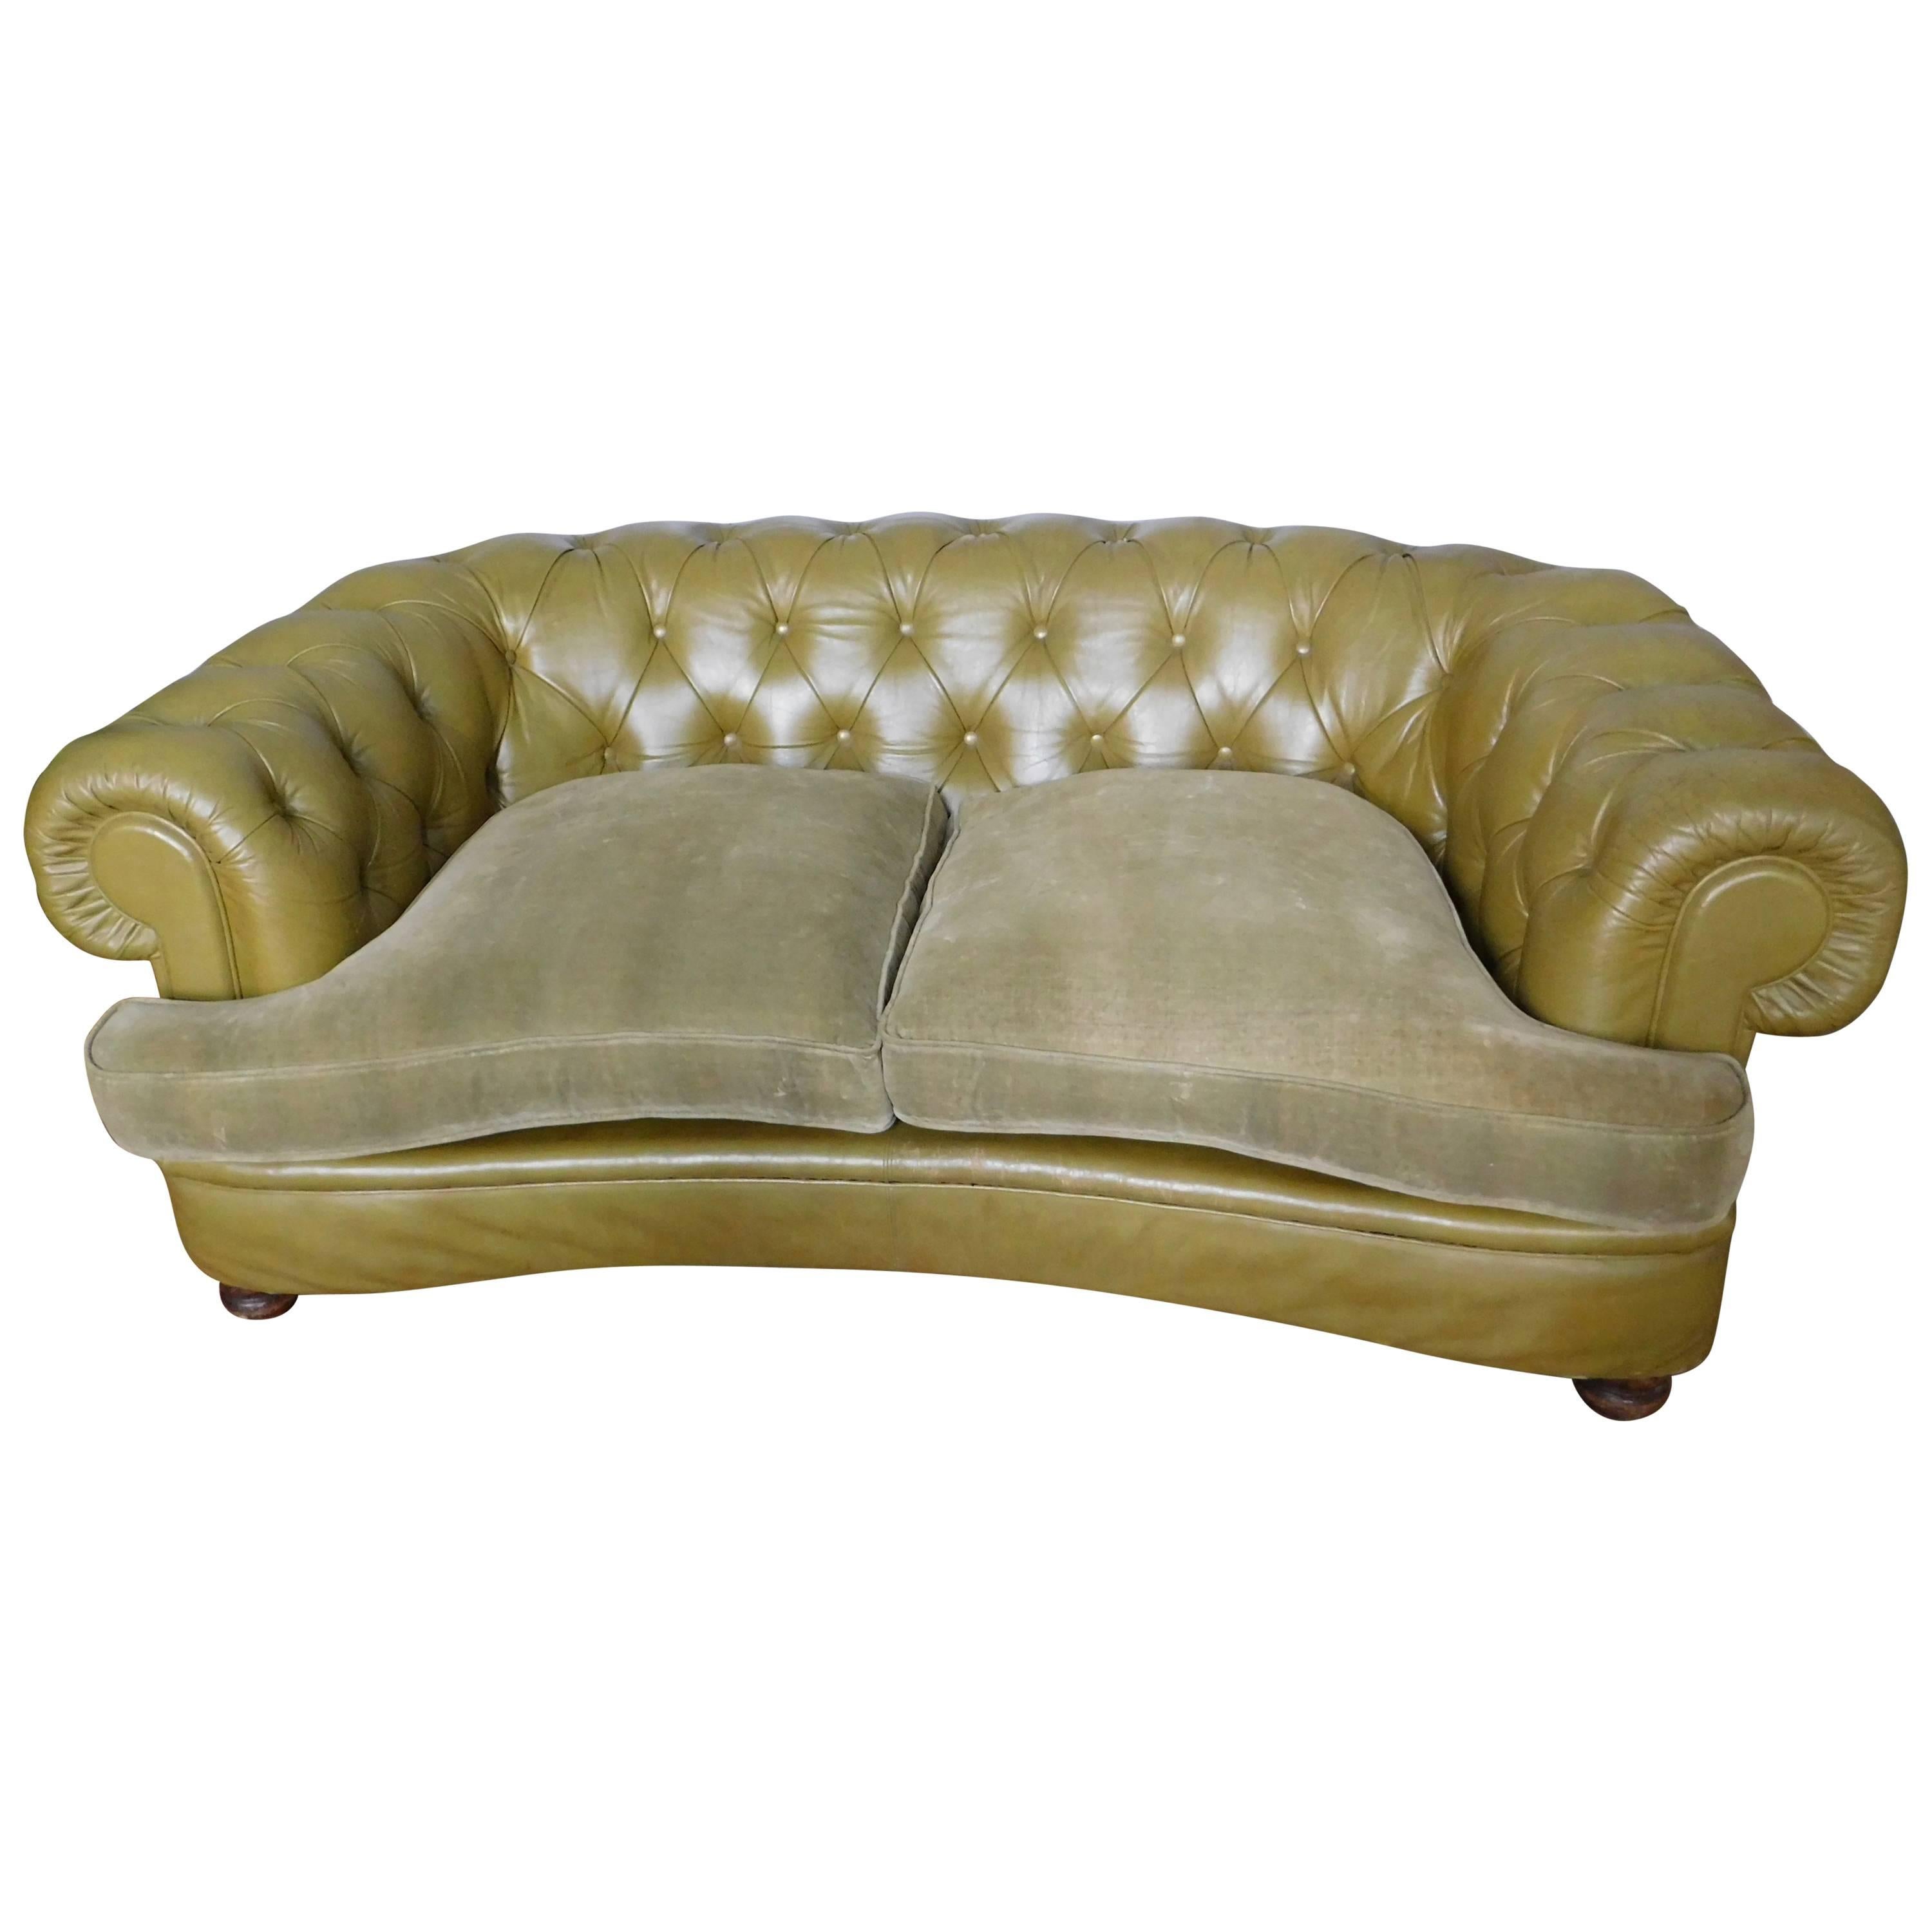 Vintage English Chesterfield Settee in Olive Green Leather with Velvet Cushions For Sale